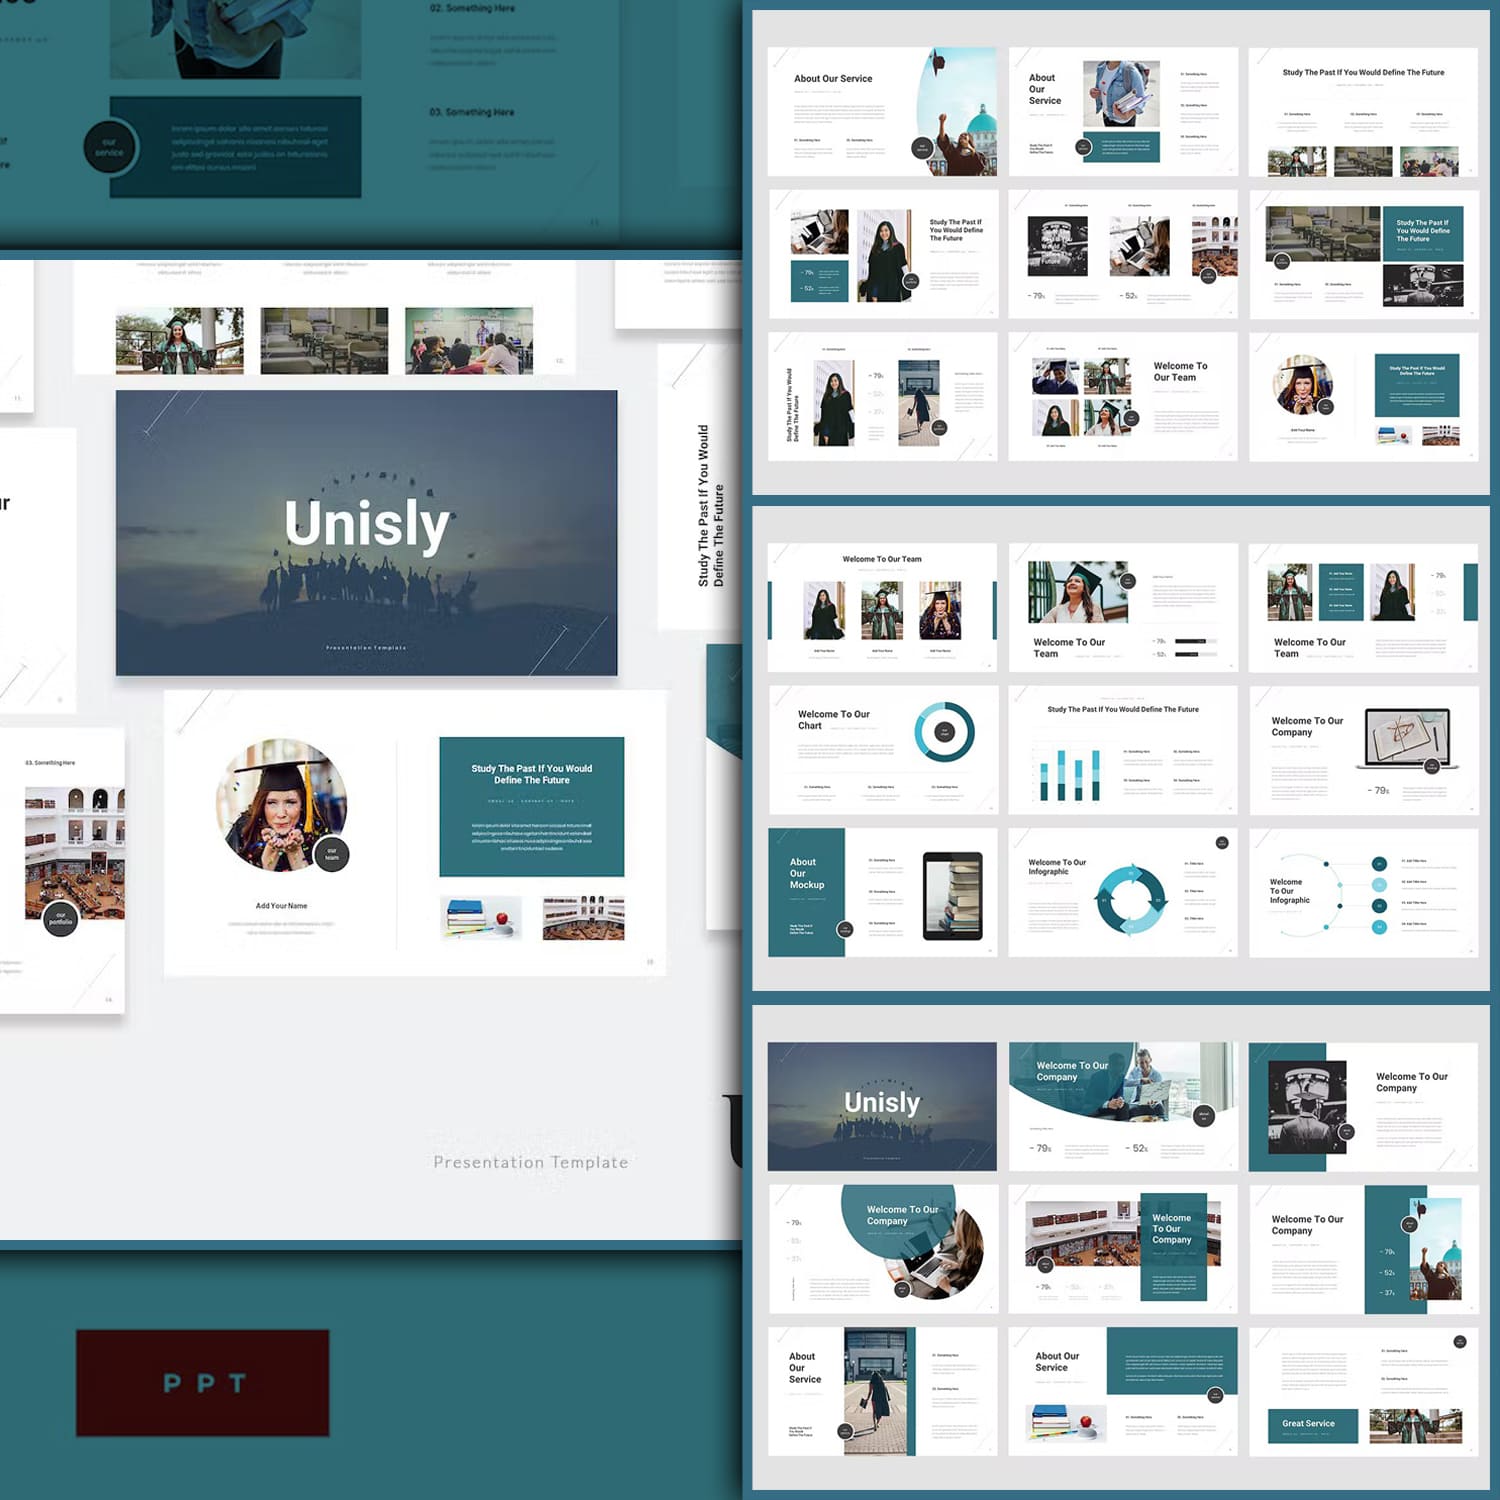 Unisly - University Education PowerPoint Template Cover.